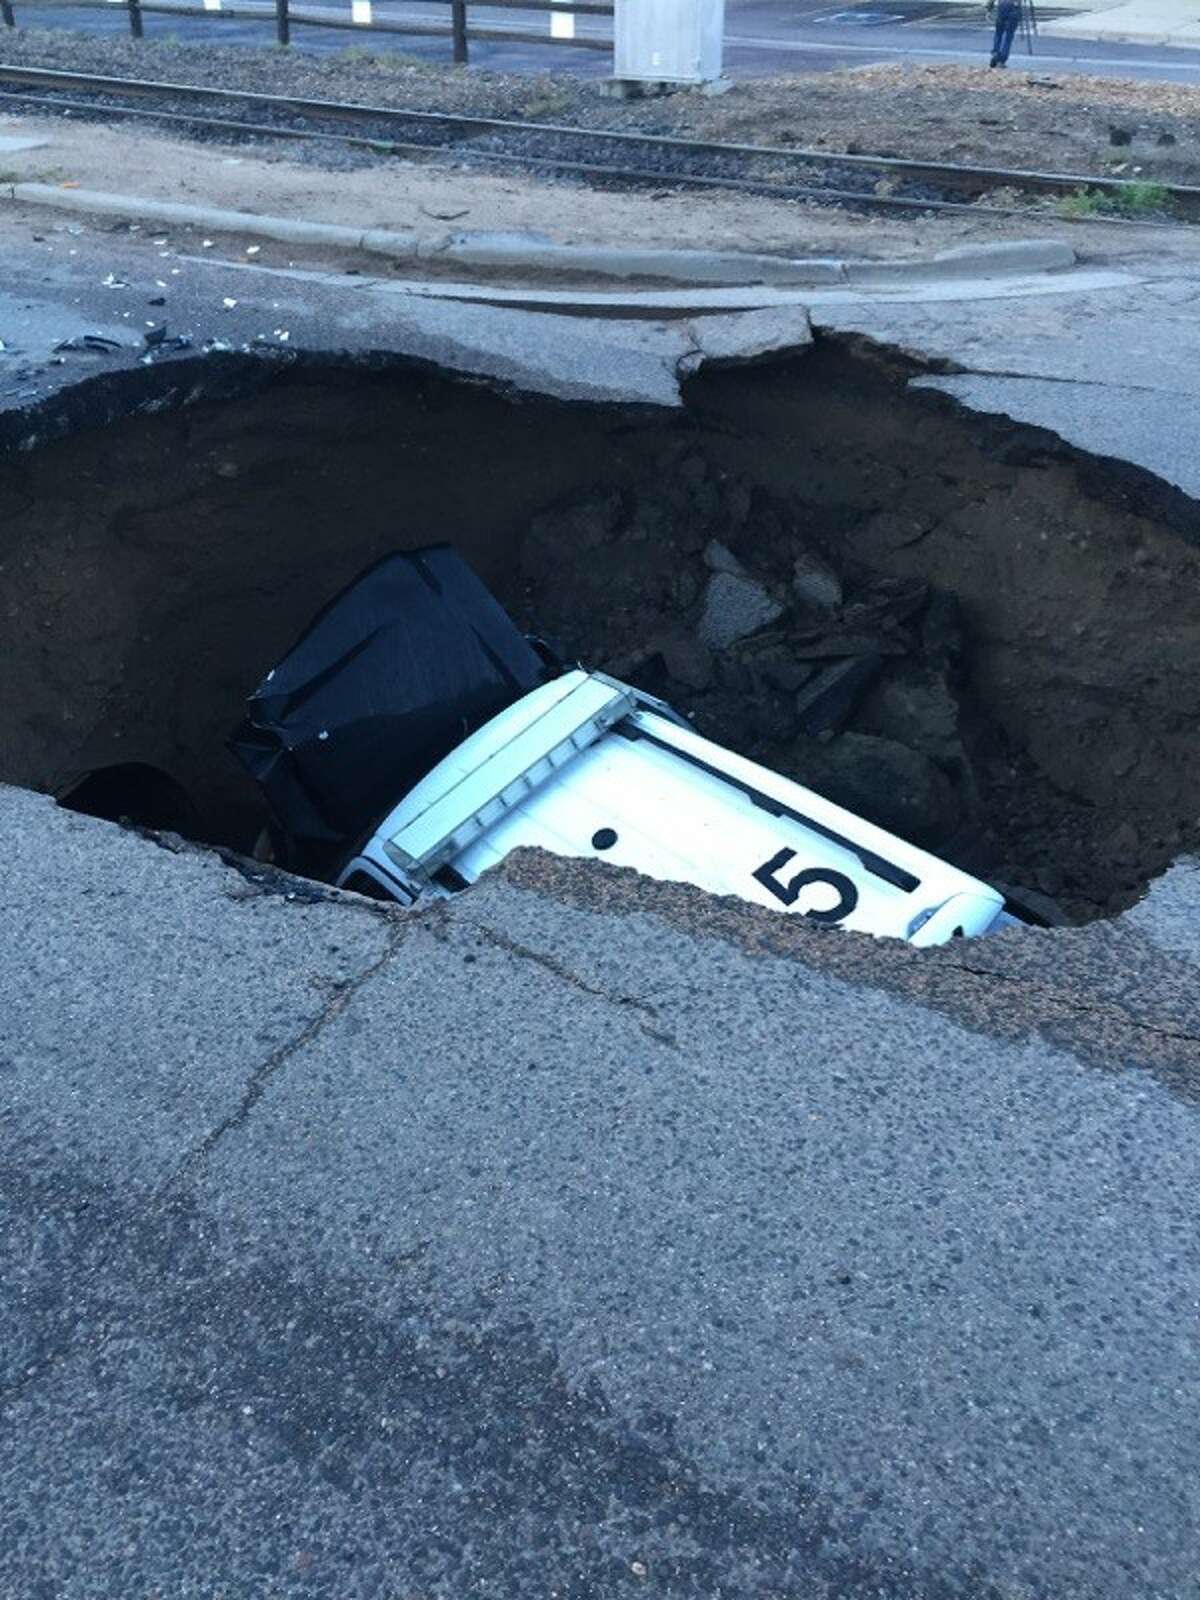 A police SUV was swallowed by a 15-feet deep sinkhole Friday morning near Denver following torrential storms that hit the area.